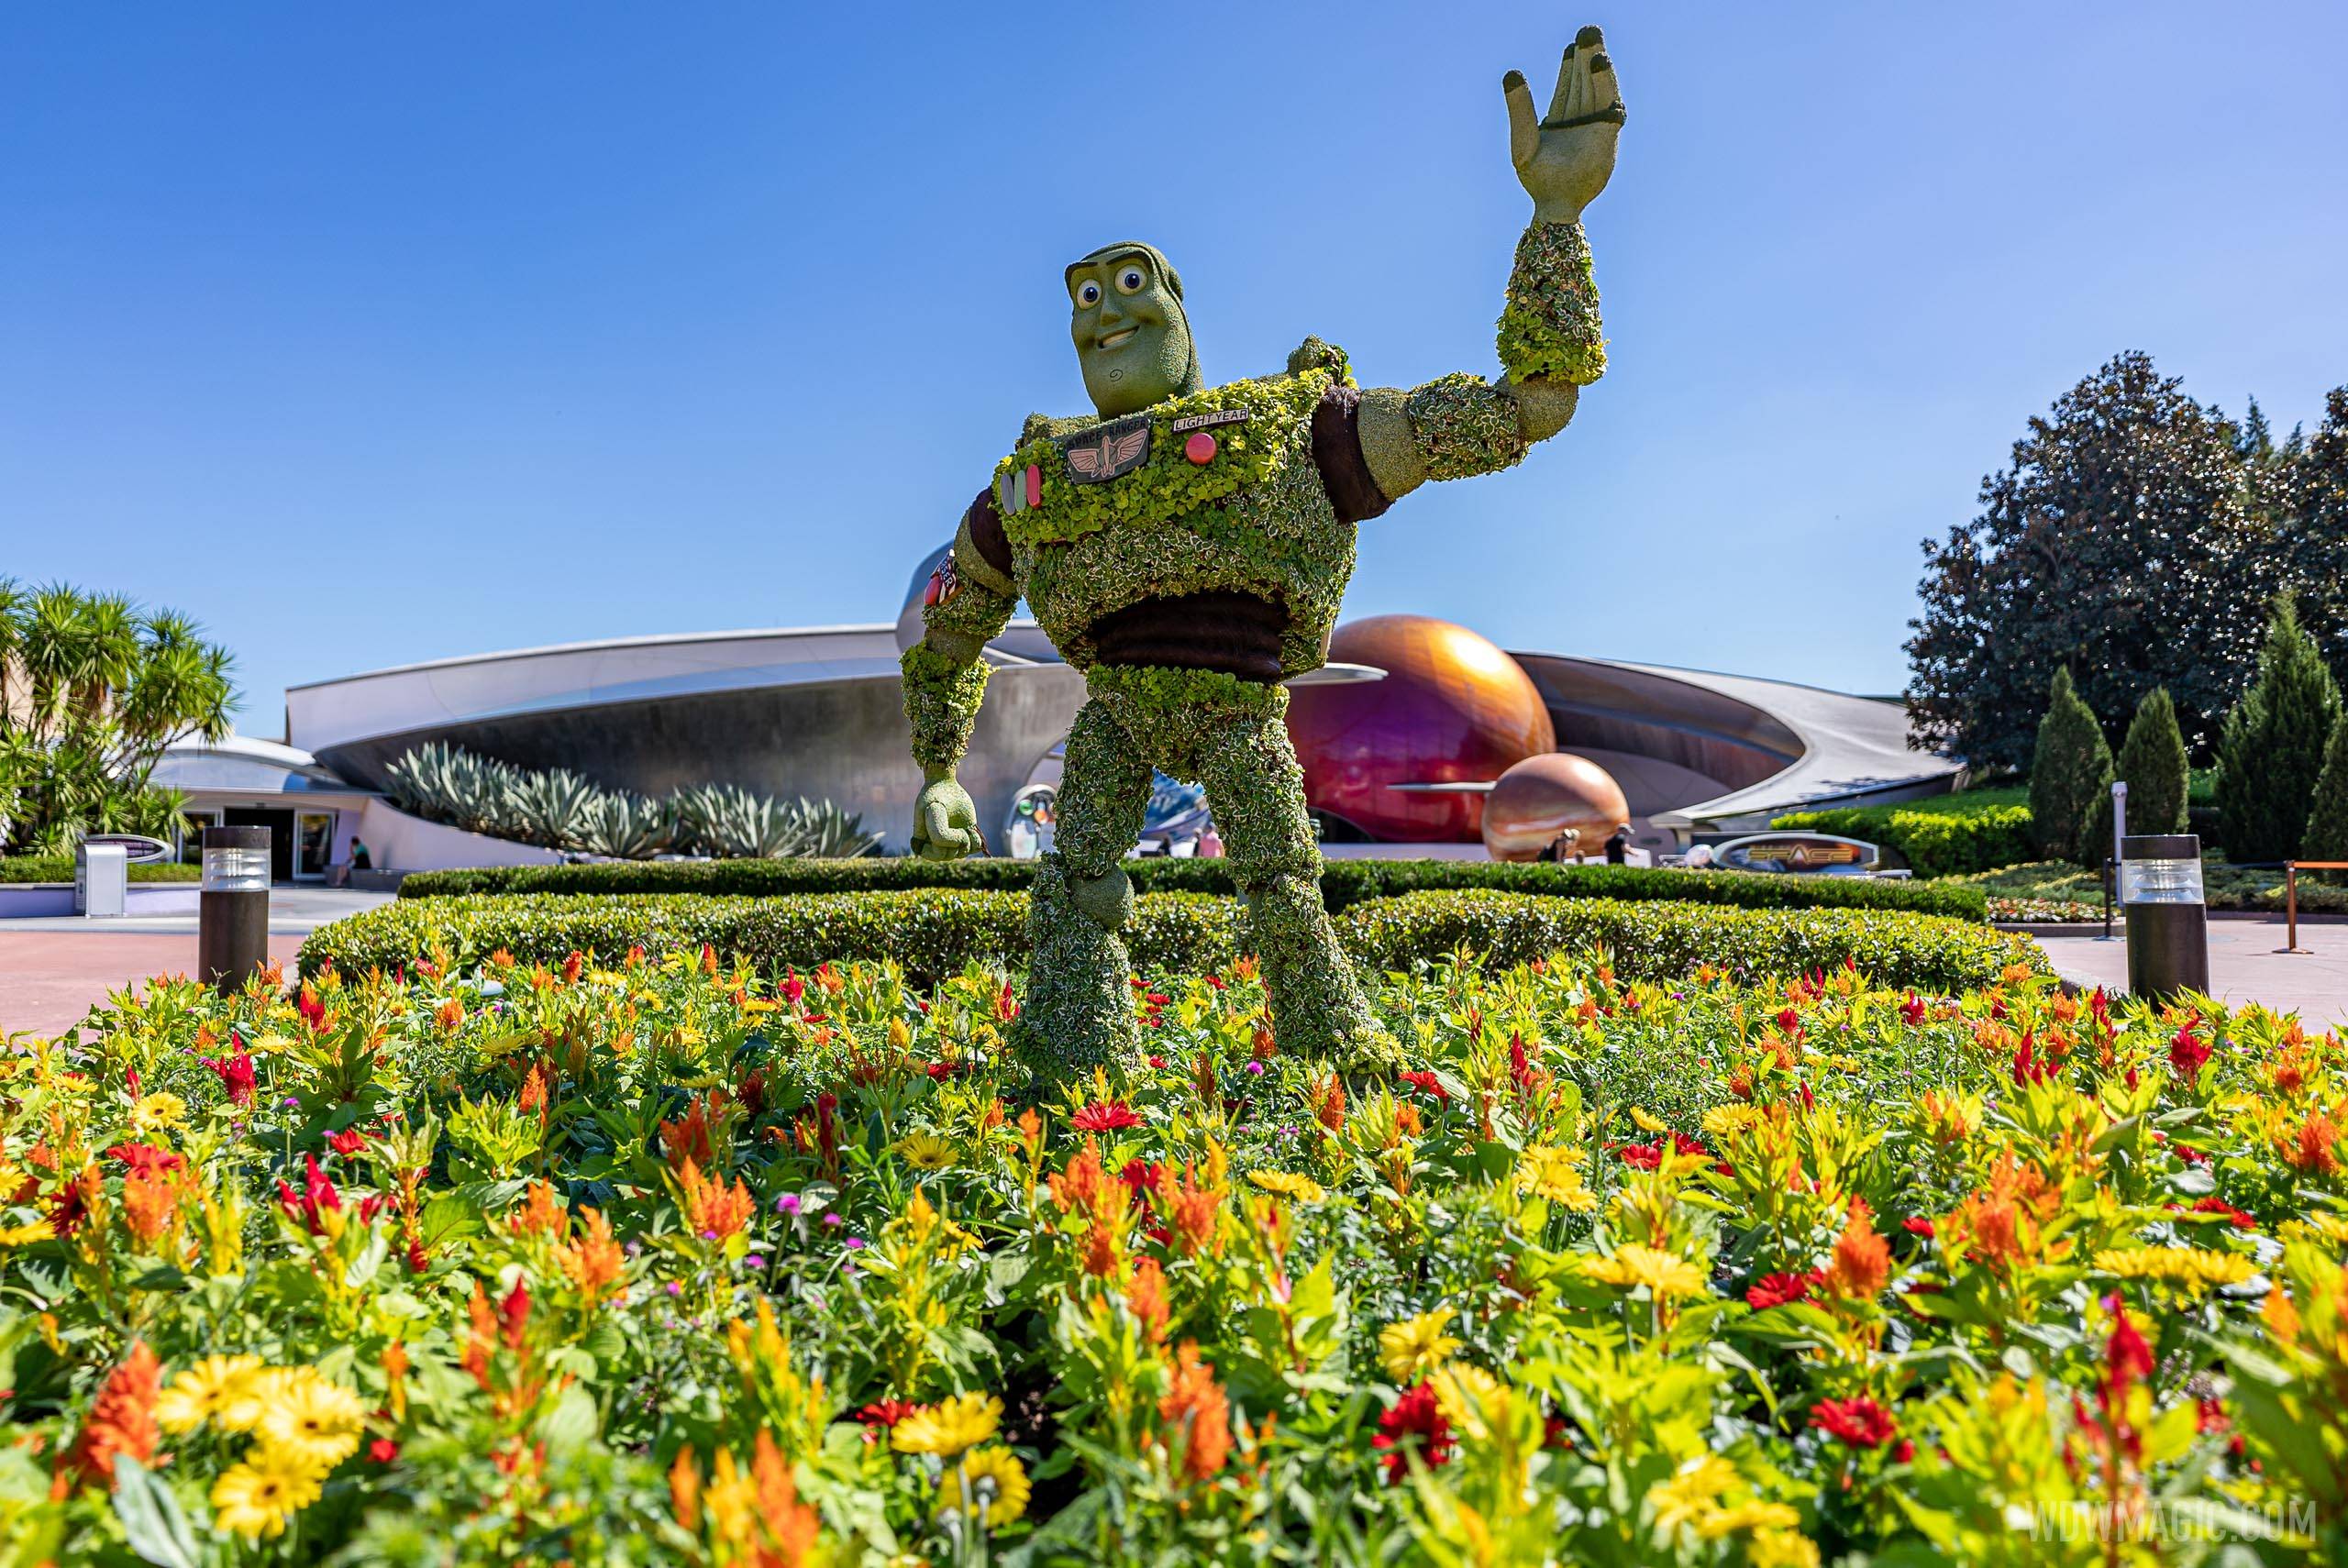 Buzz Lightyear – Future World East near Mission: SPACE